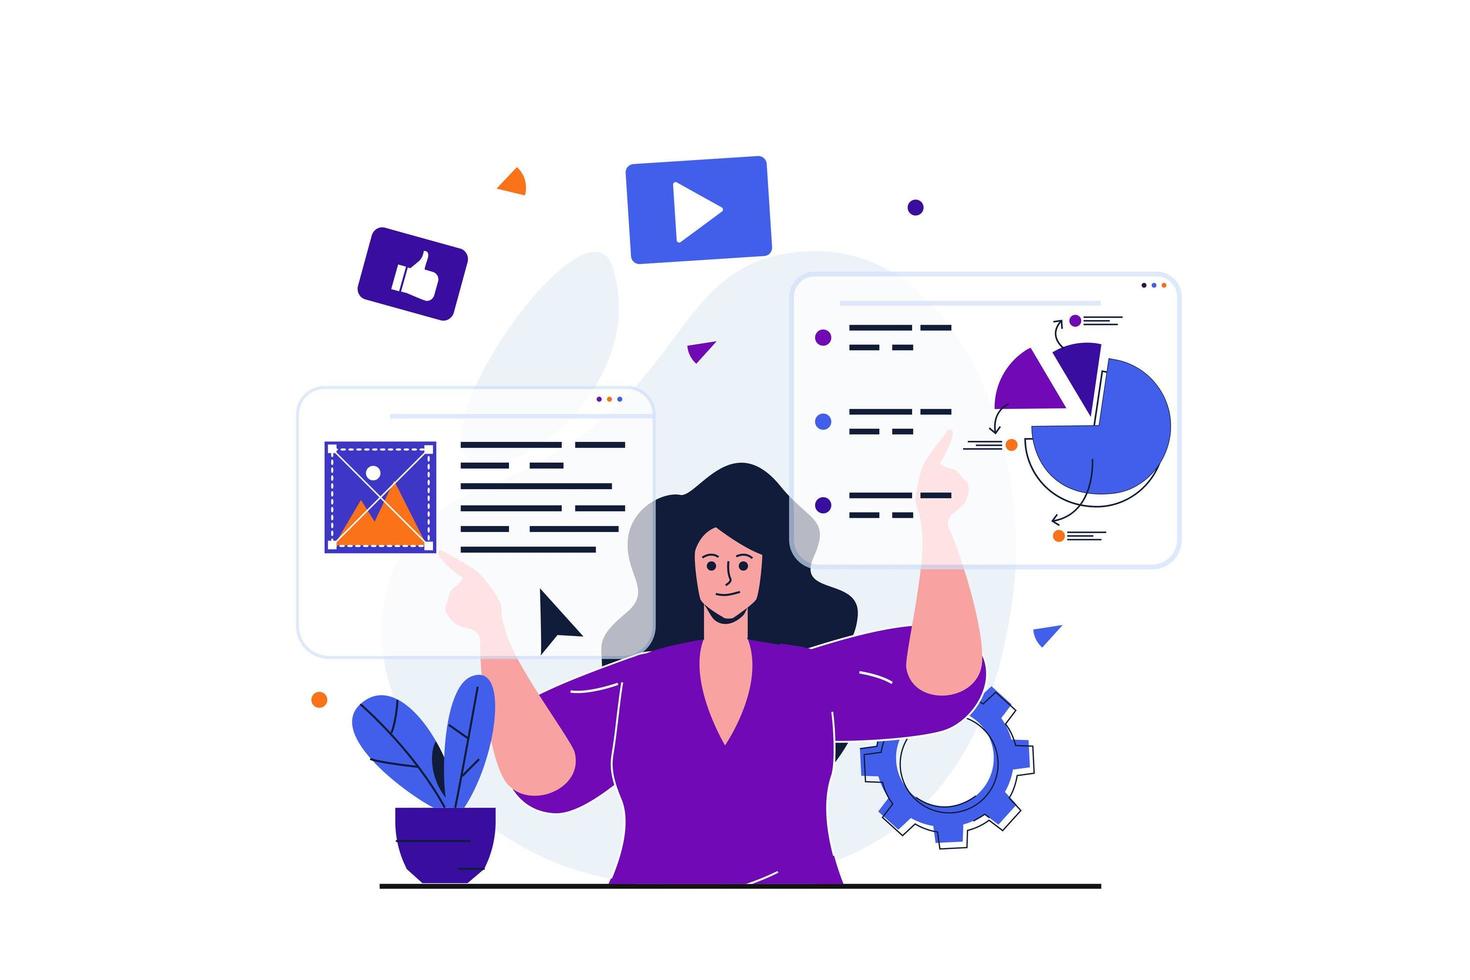 Marketing modern flat concept for web banner design. Woman marketer analyzes data and optimizes web page working on screens and doing market research. Vector illustration with isolated people scene